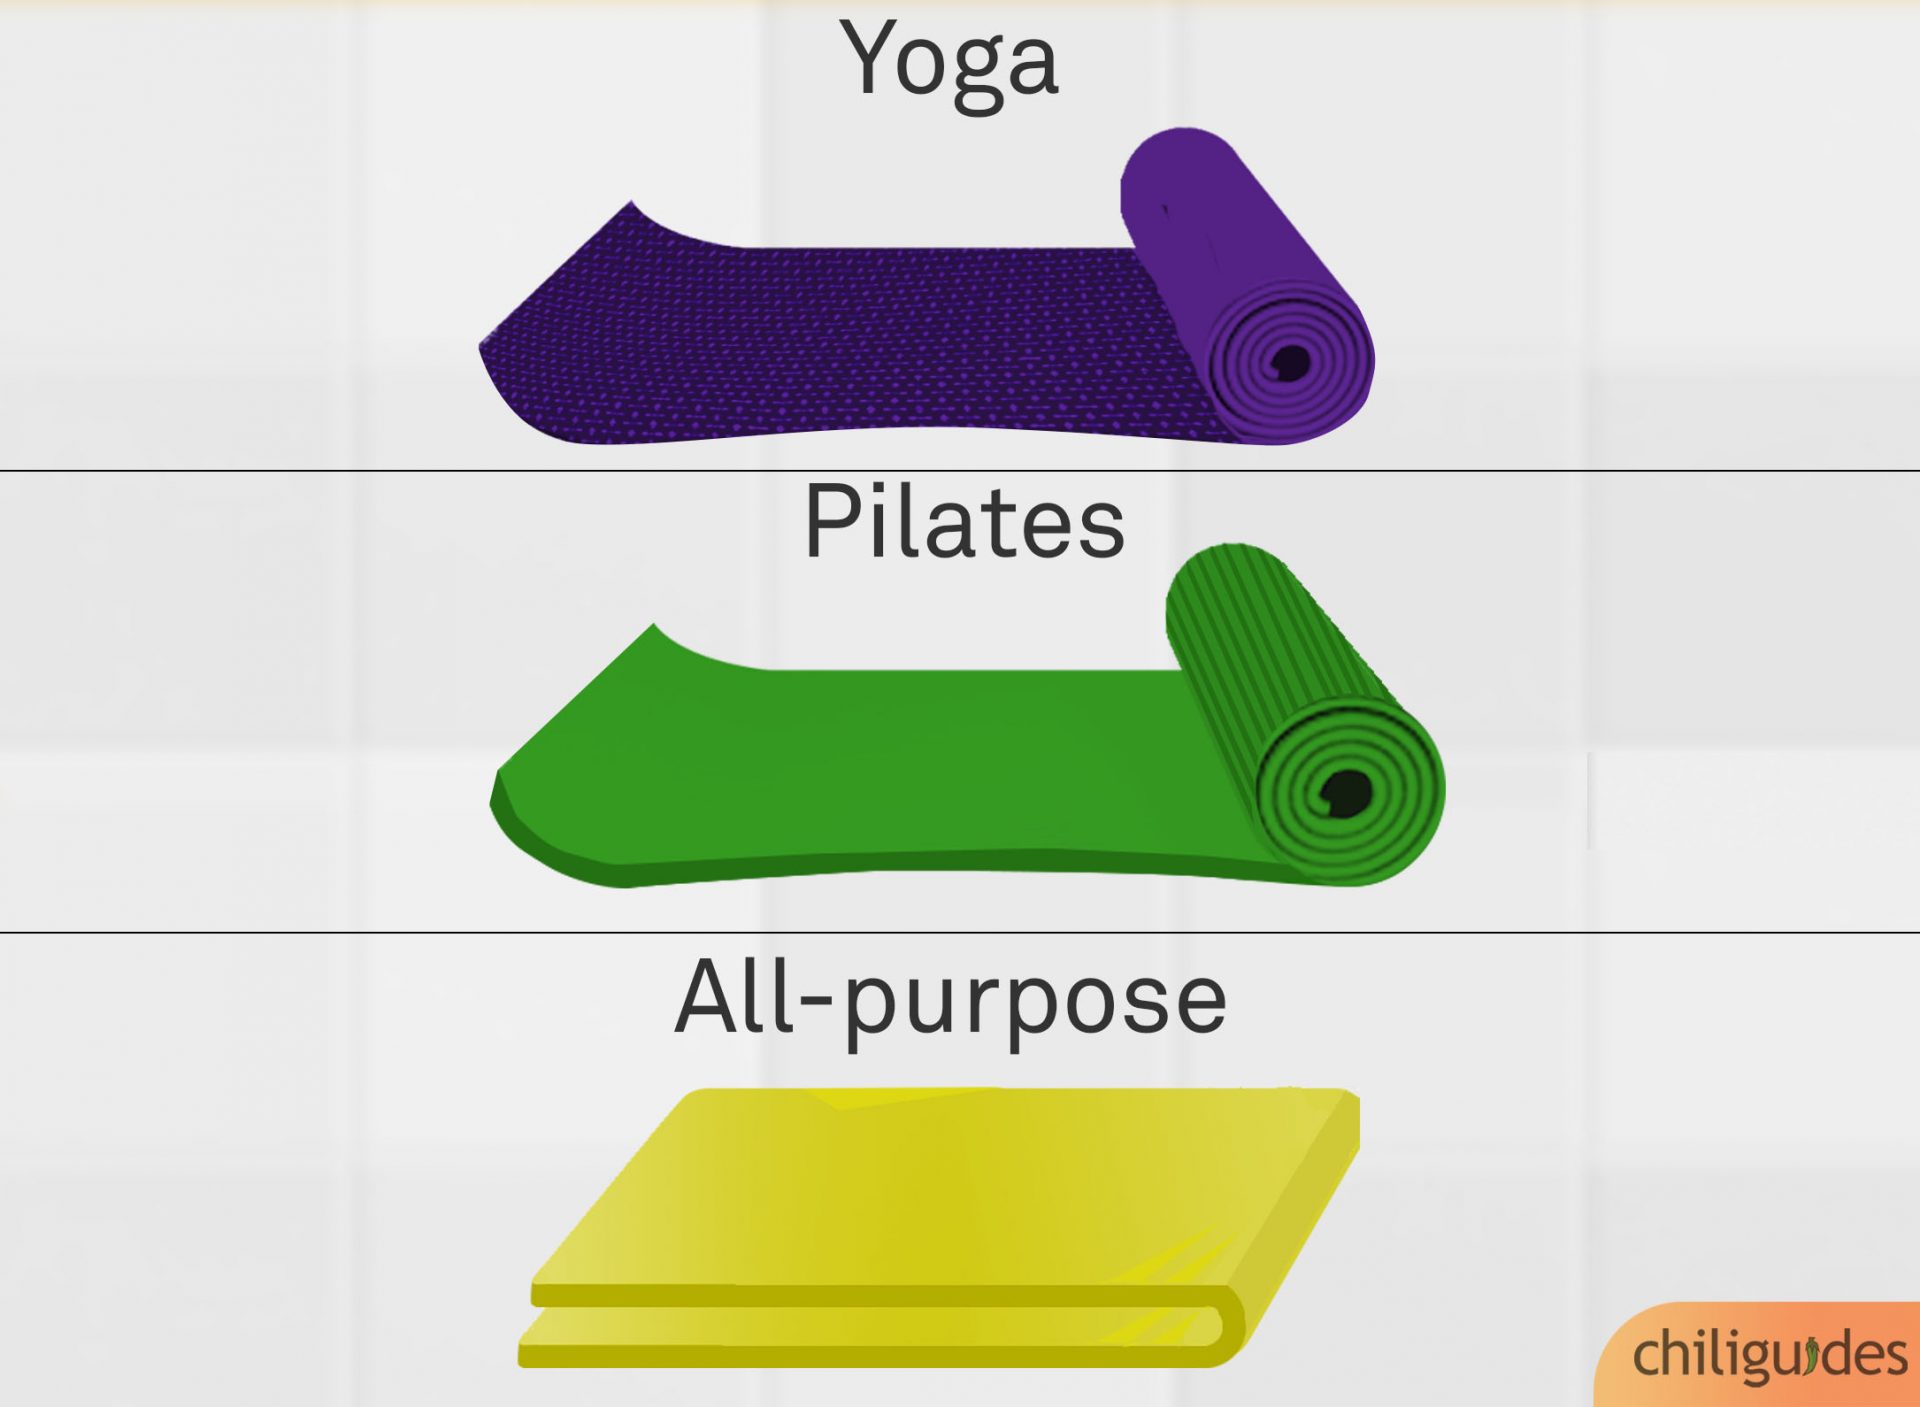 What's the difference between a Gym mat and a Yoga mat? - Quora